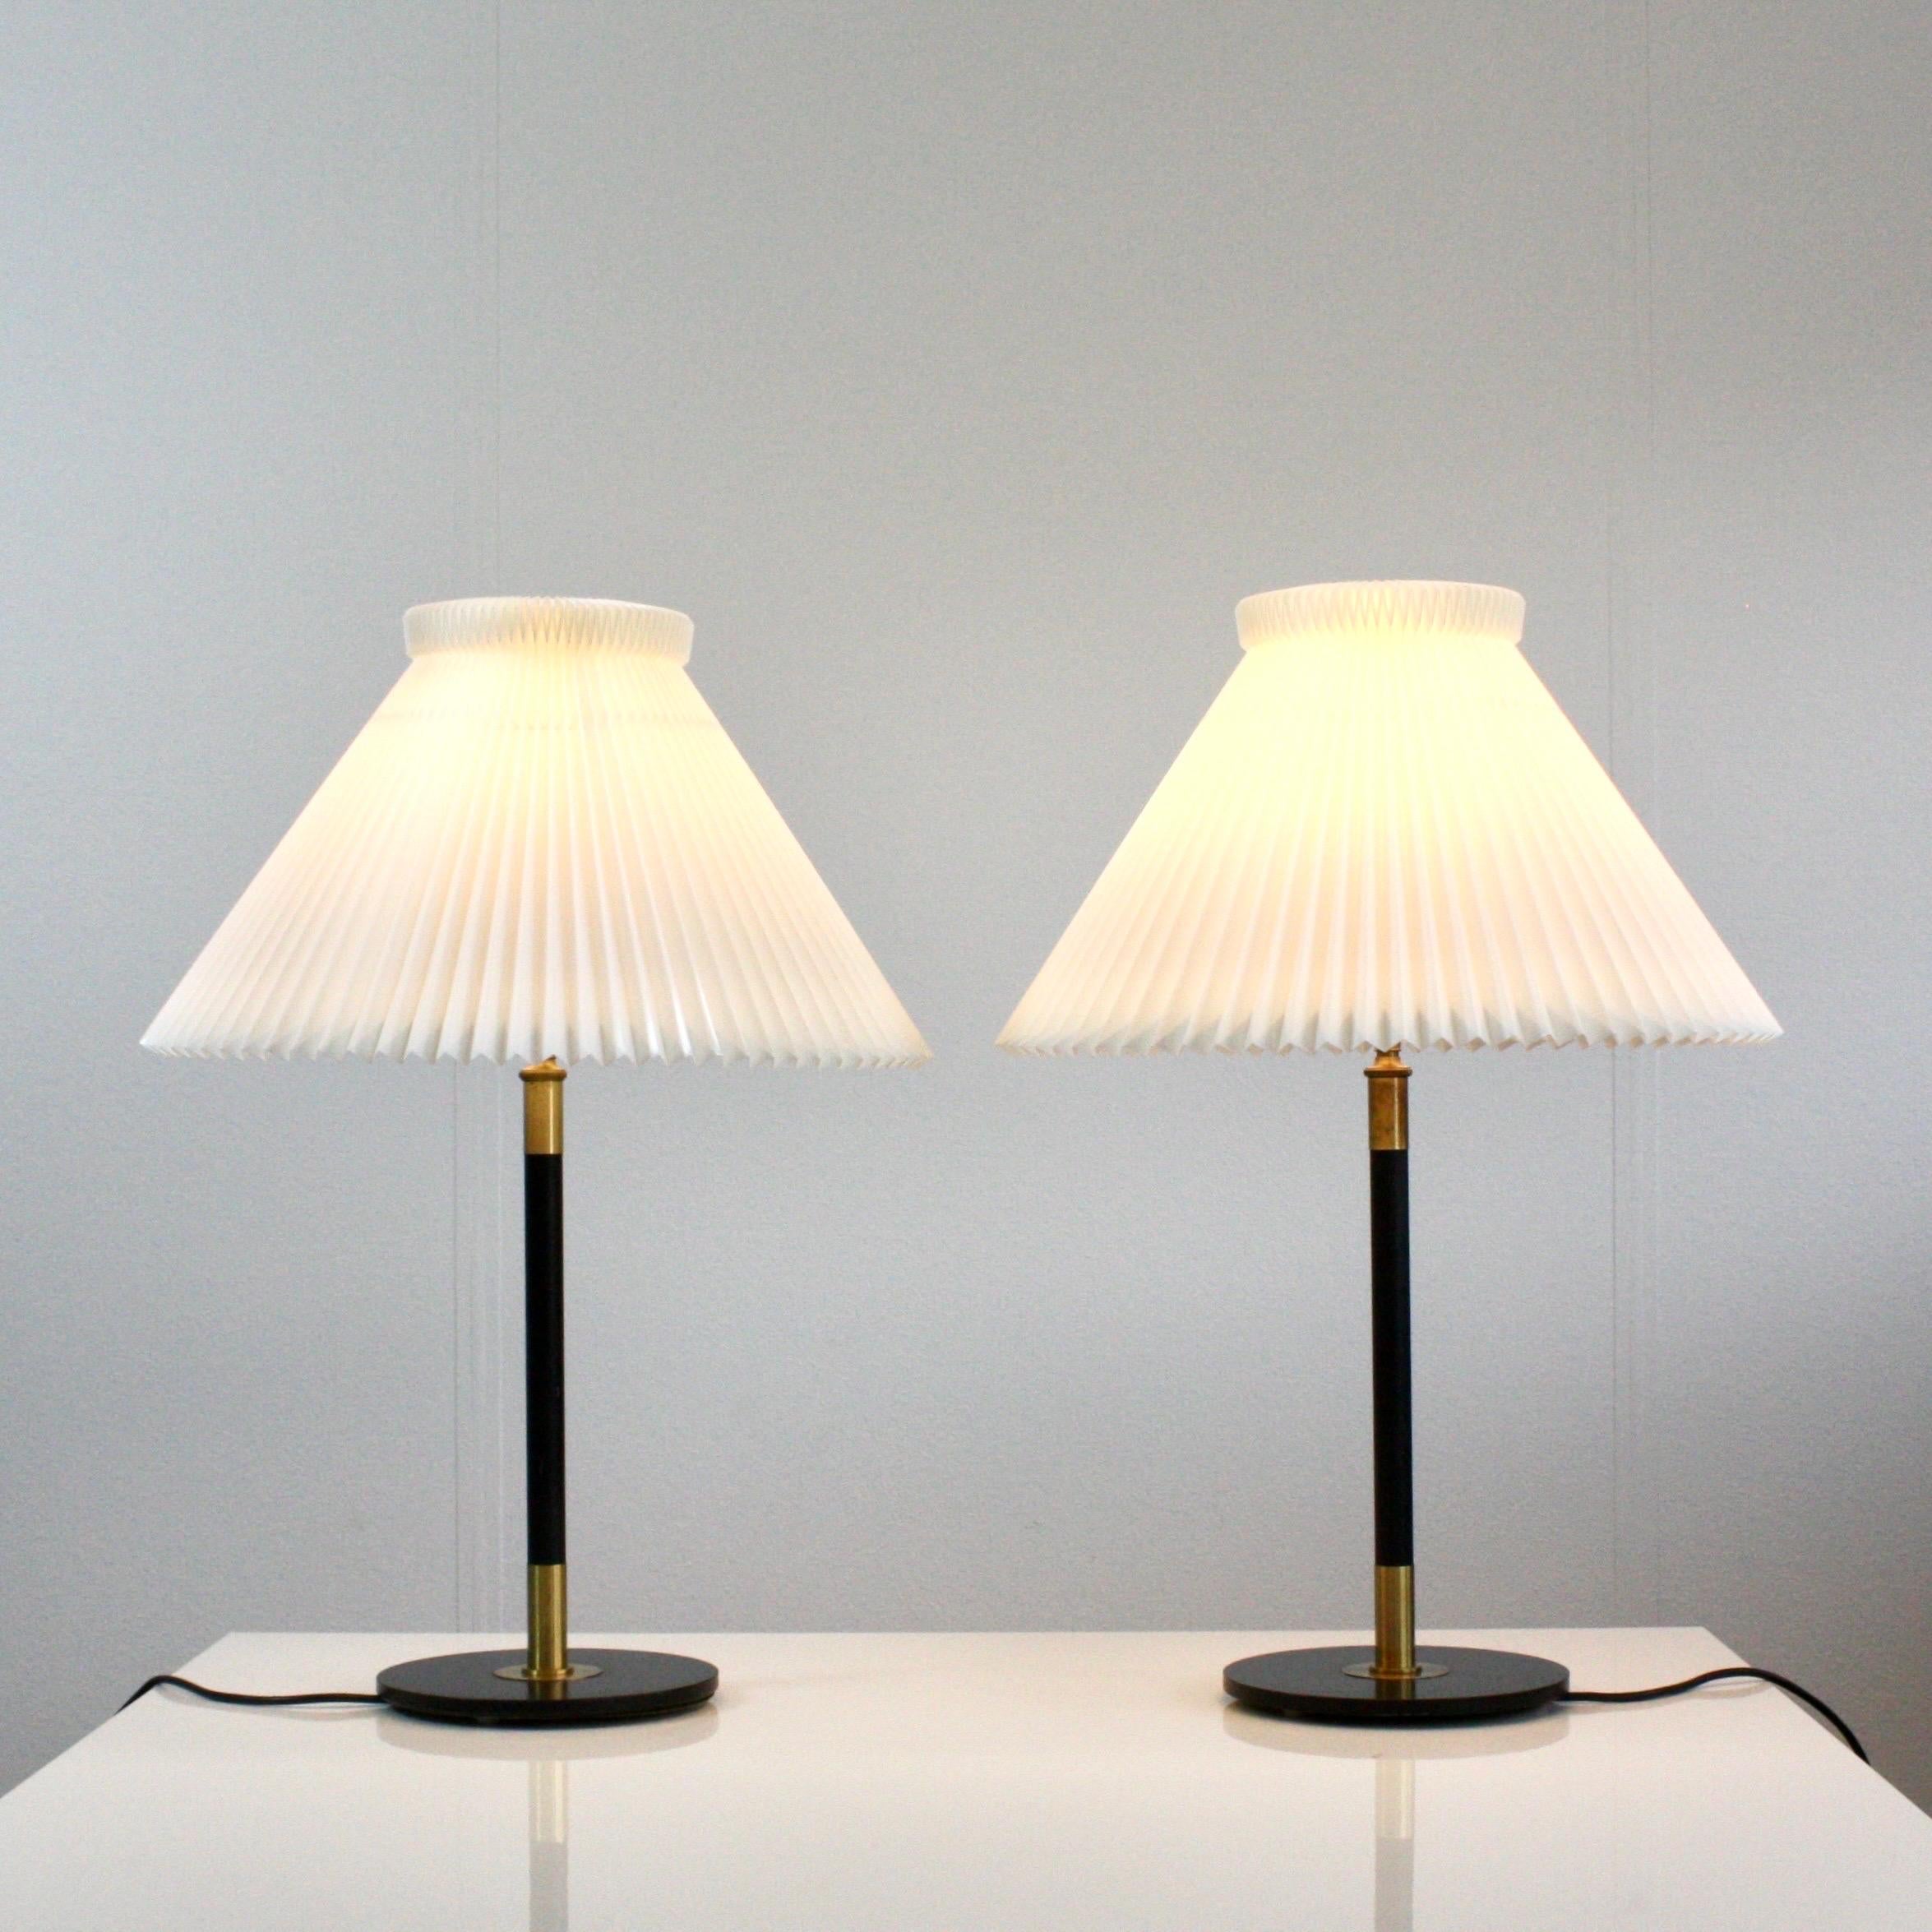 A pair of table lamps designed by Aage Petersen for Le Klint in 1950 featuring black metal bases and the classic white Le Klint shades. The set is in very fine  vintage condition.

* A pair of black table lamps with brass details and hand-pleaded